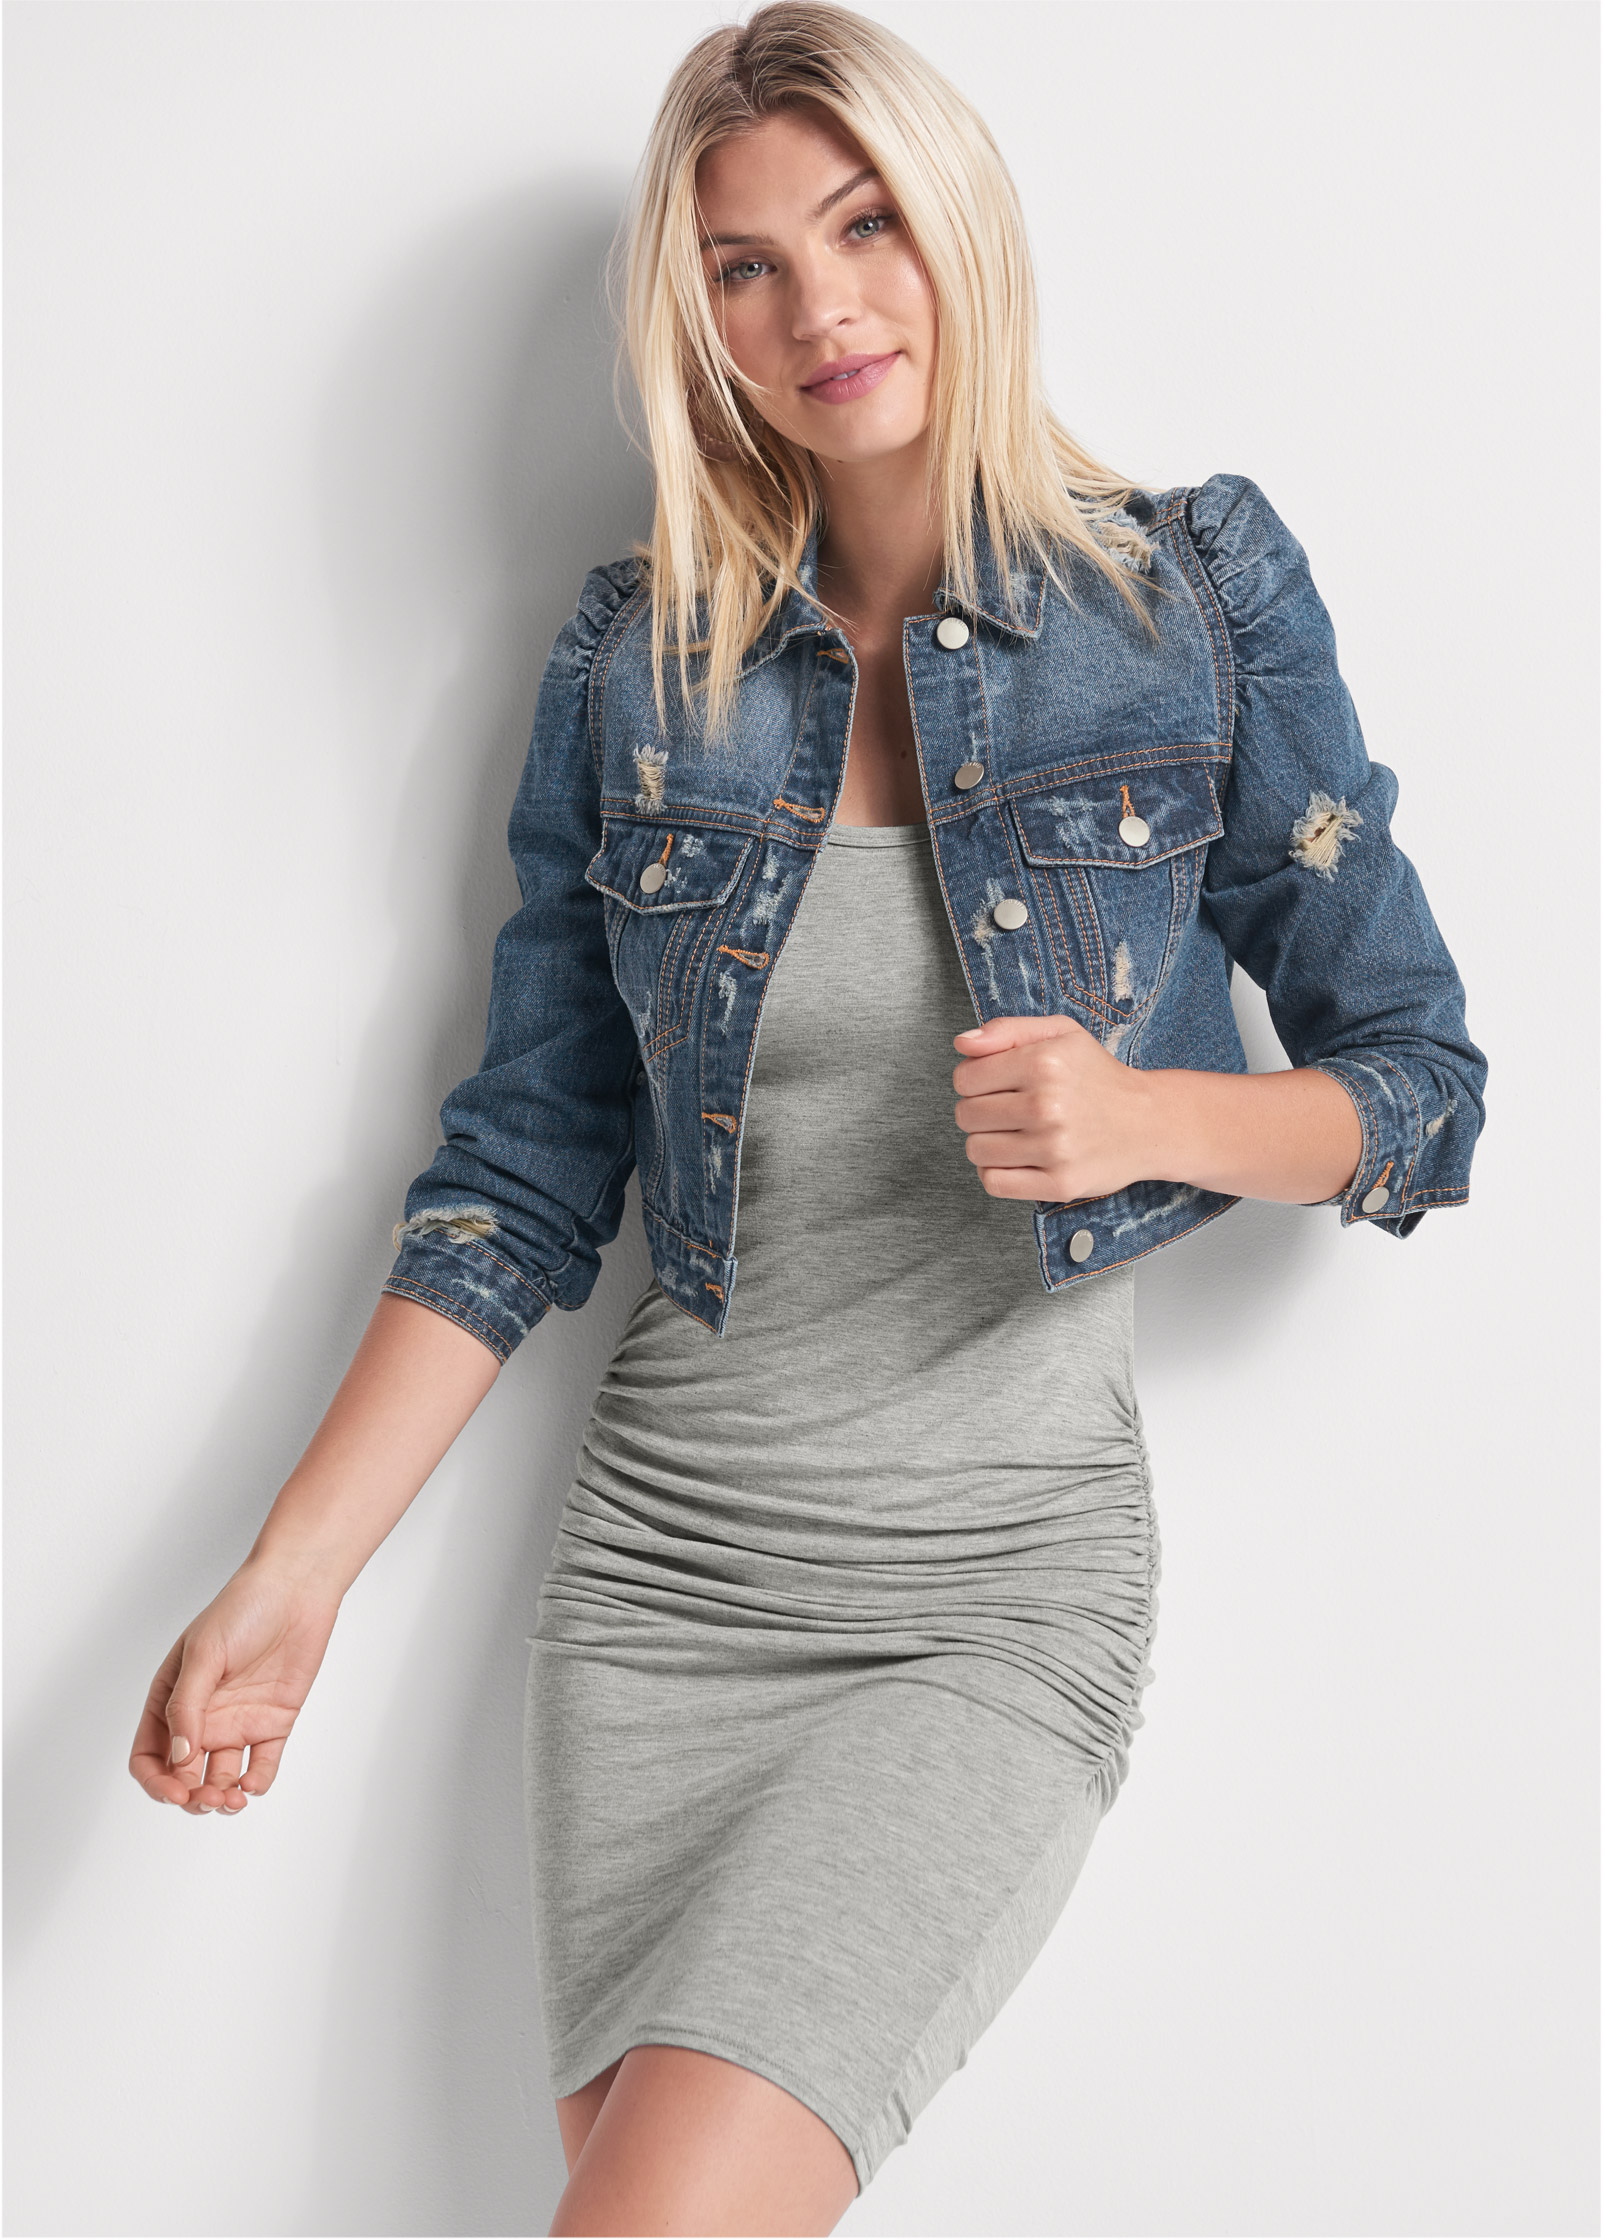 jean jacket with grey sleeves